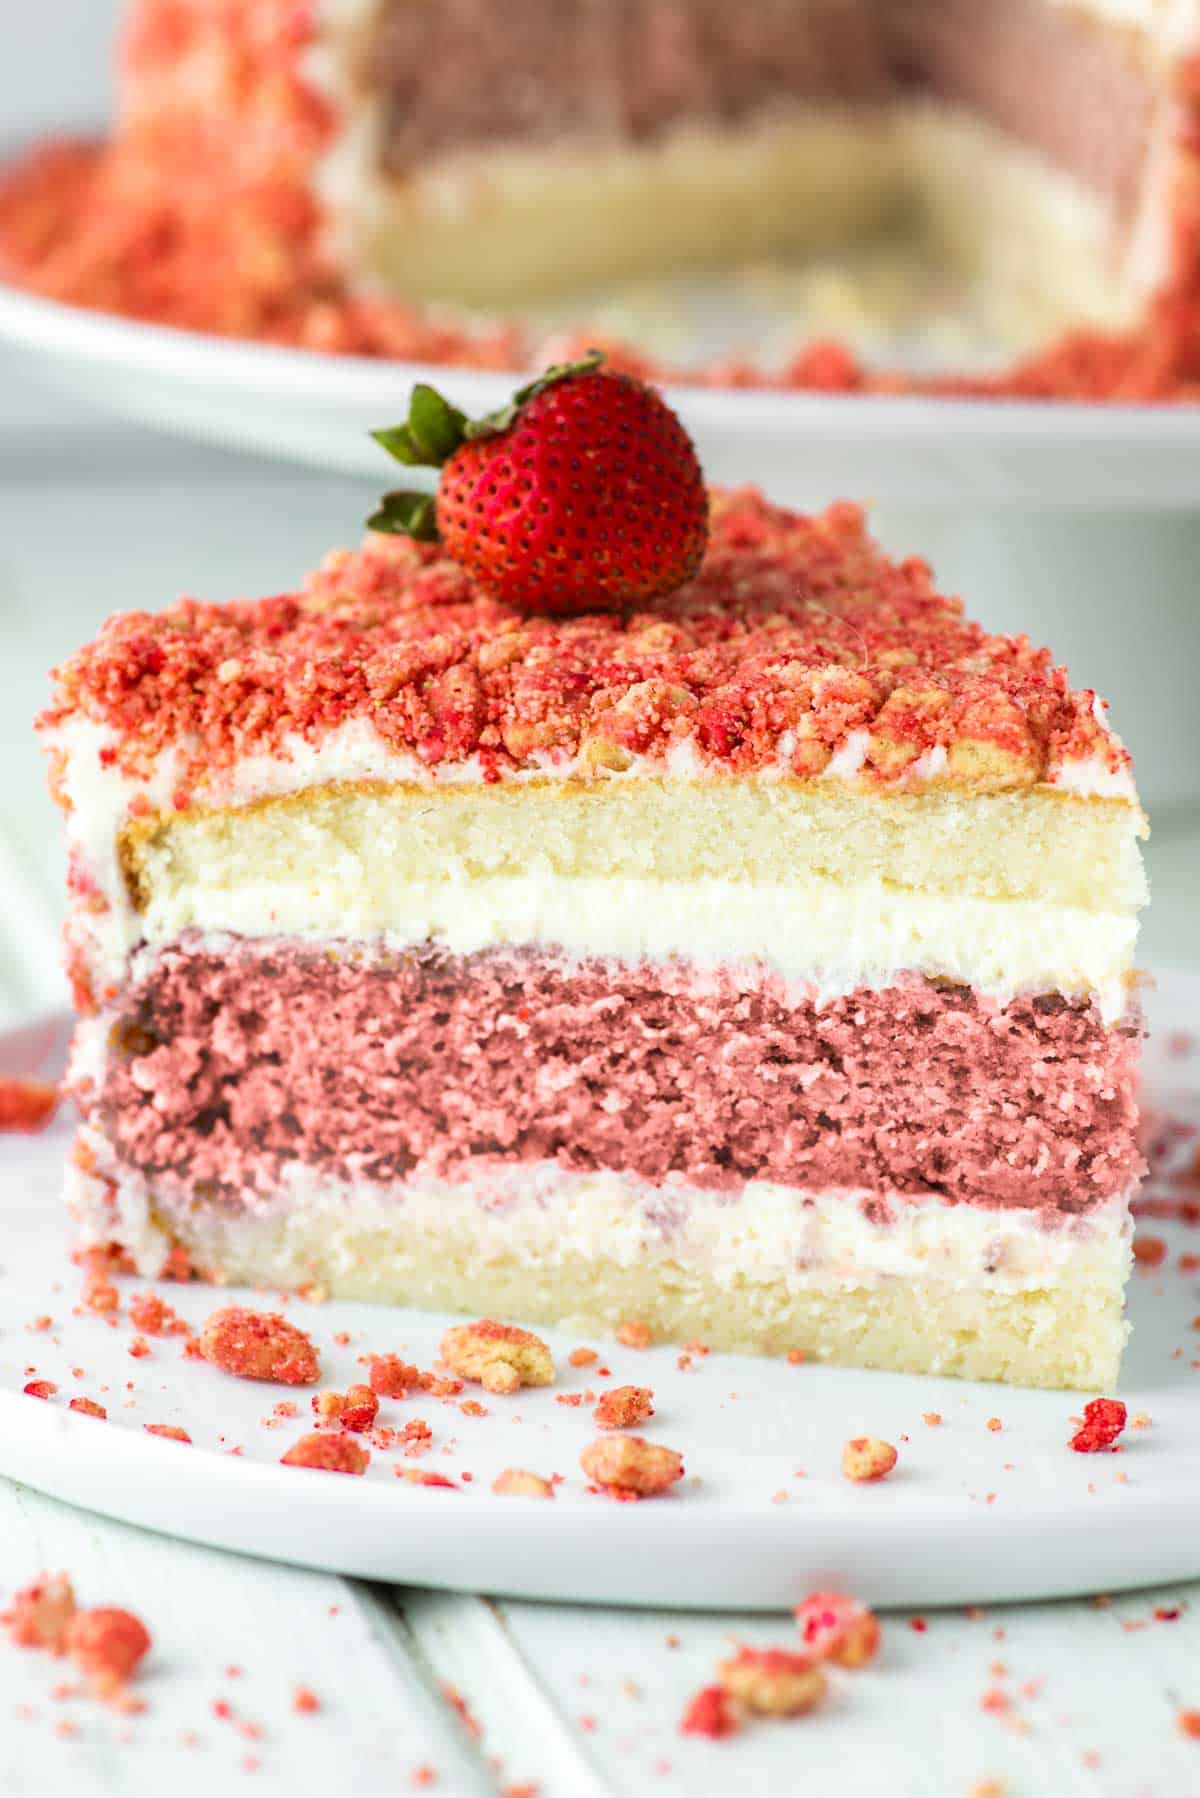 slice of strawberry crunch cake on white plate